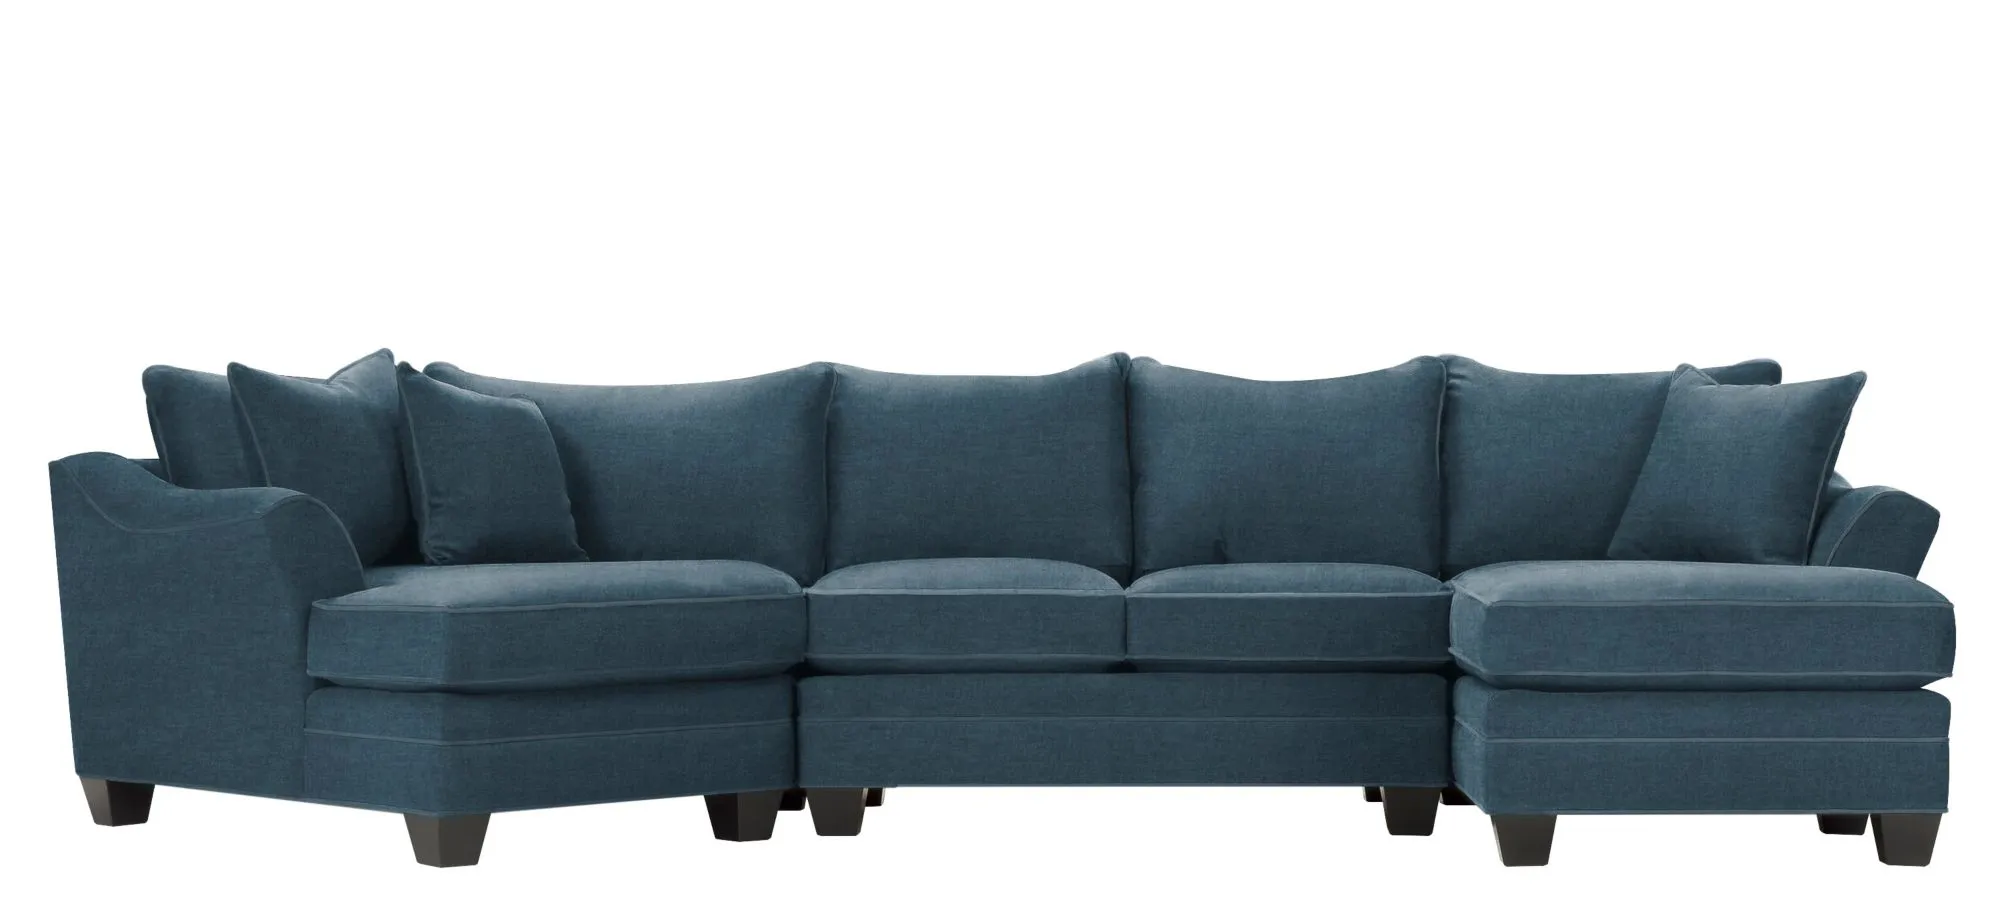 Foresthill 3-pc. Right Hand Facing Sectional Sofa in Santa Rosa Denim by H.M. Richards